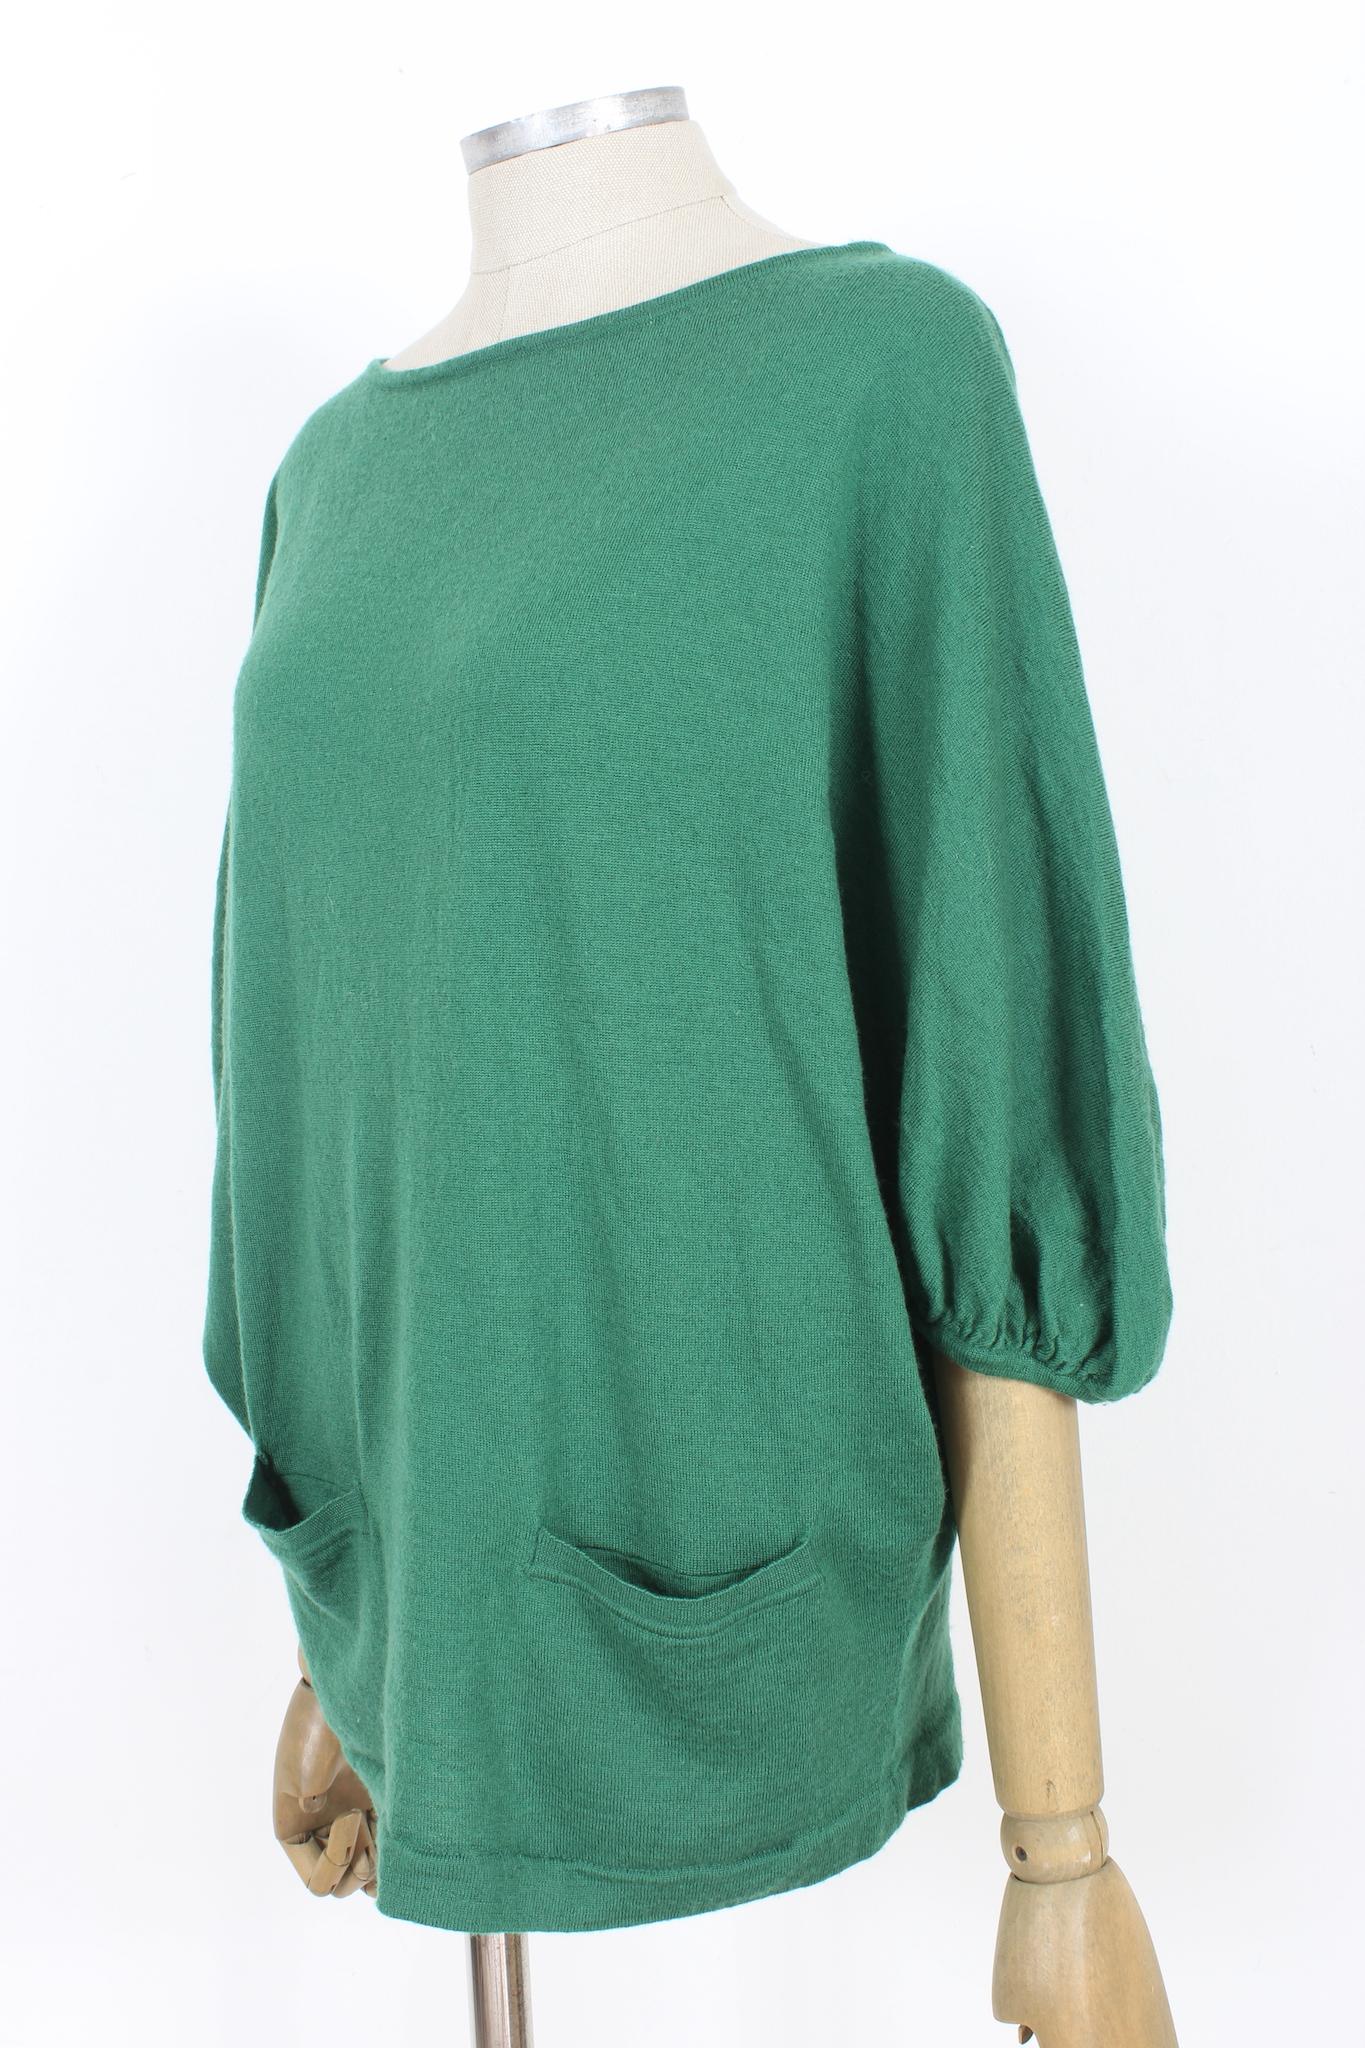 Alberta Ferretti Wool Green Casual Sweater 2000s In Good Condition For Sale In Brindisi, Bt